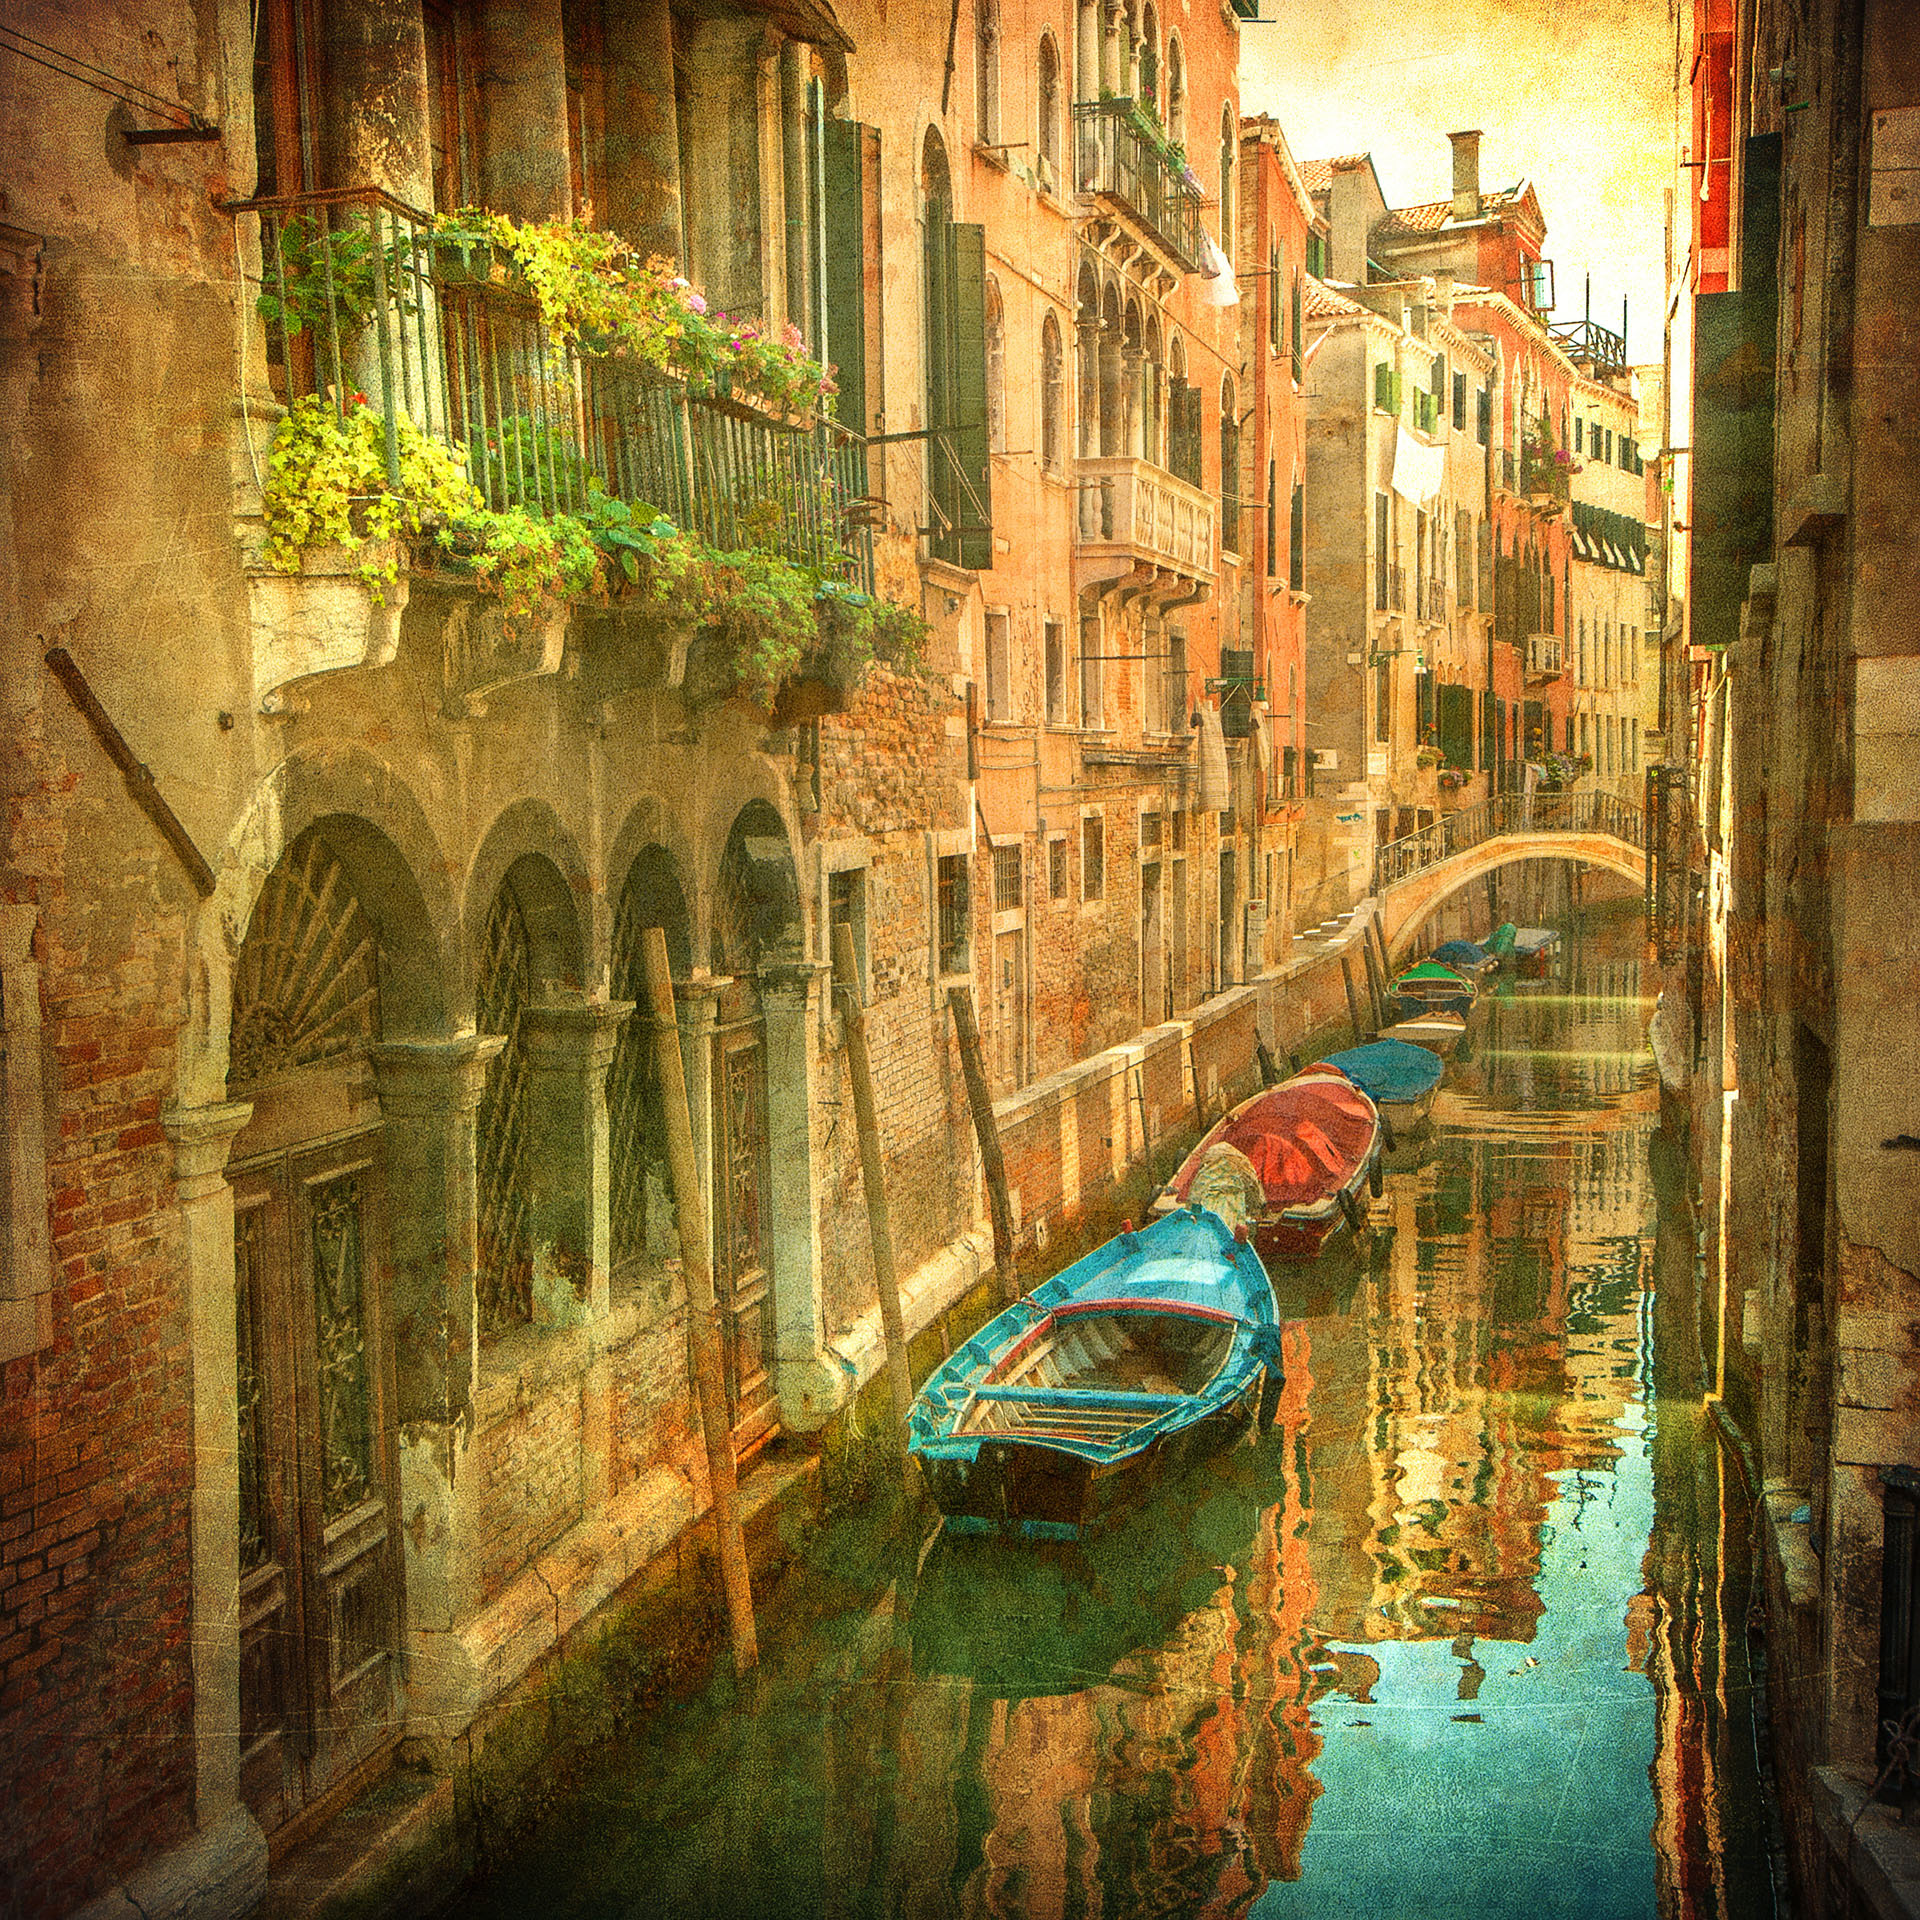 Vintage Venice Canal Italy Photo Wallpaper Wall Mural Cn 156p